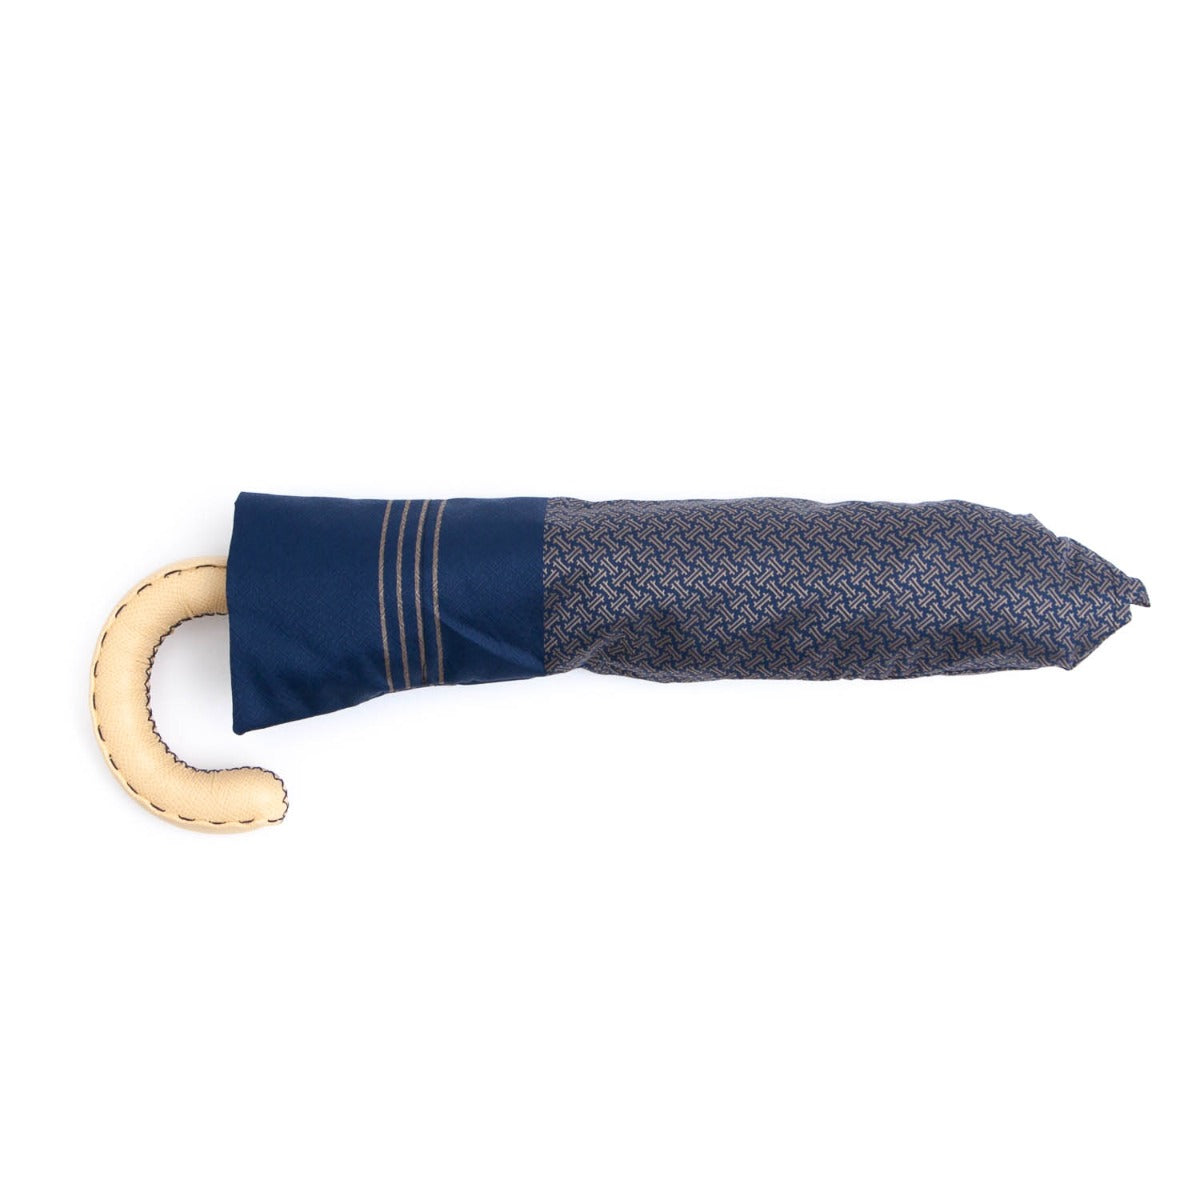 A Patterned Navy Travel Umbrella with Leather Handle by KirbyAllison.com.